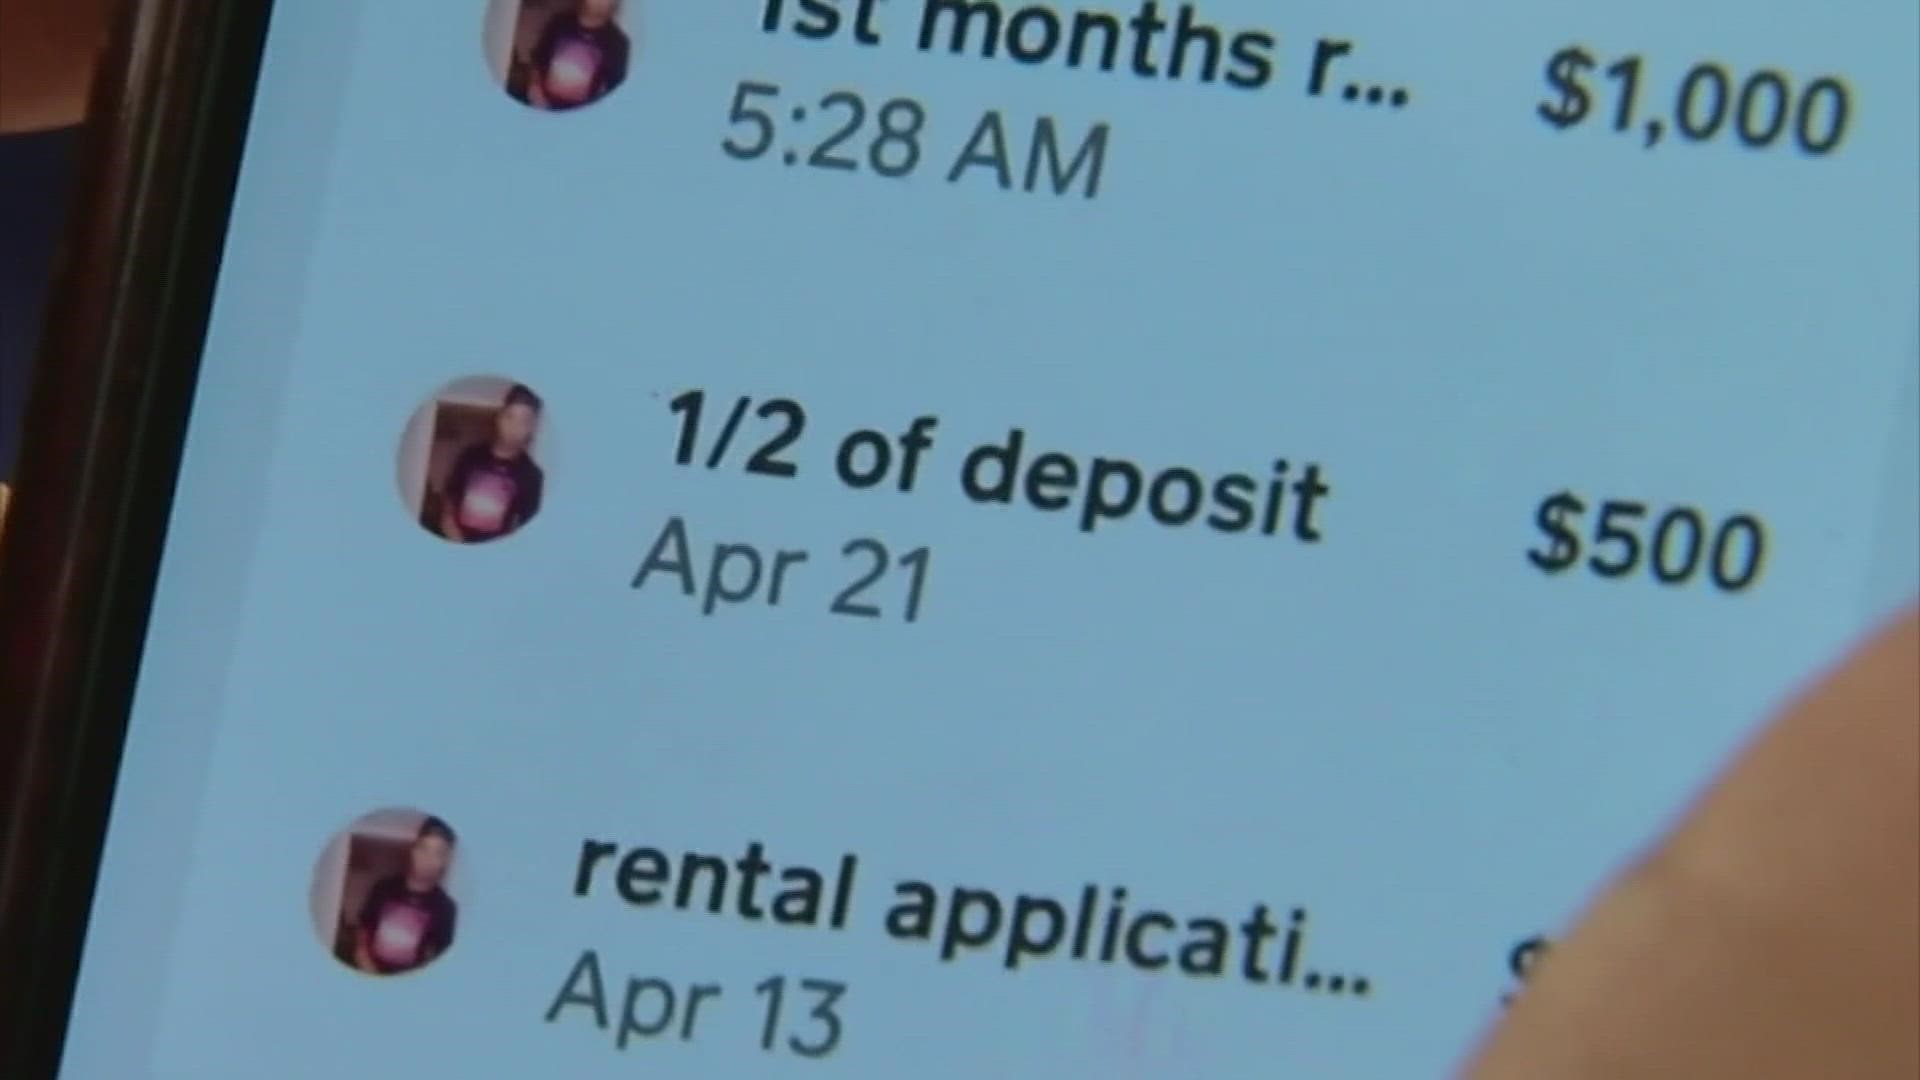 With rents skyrocketing, many renters are looking for rental homes over apartments. But scammers have already caught on.